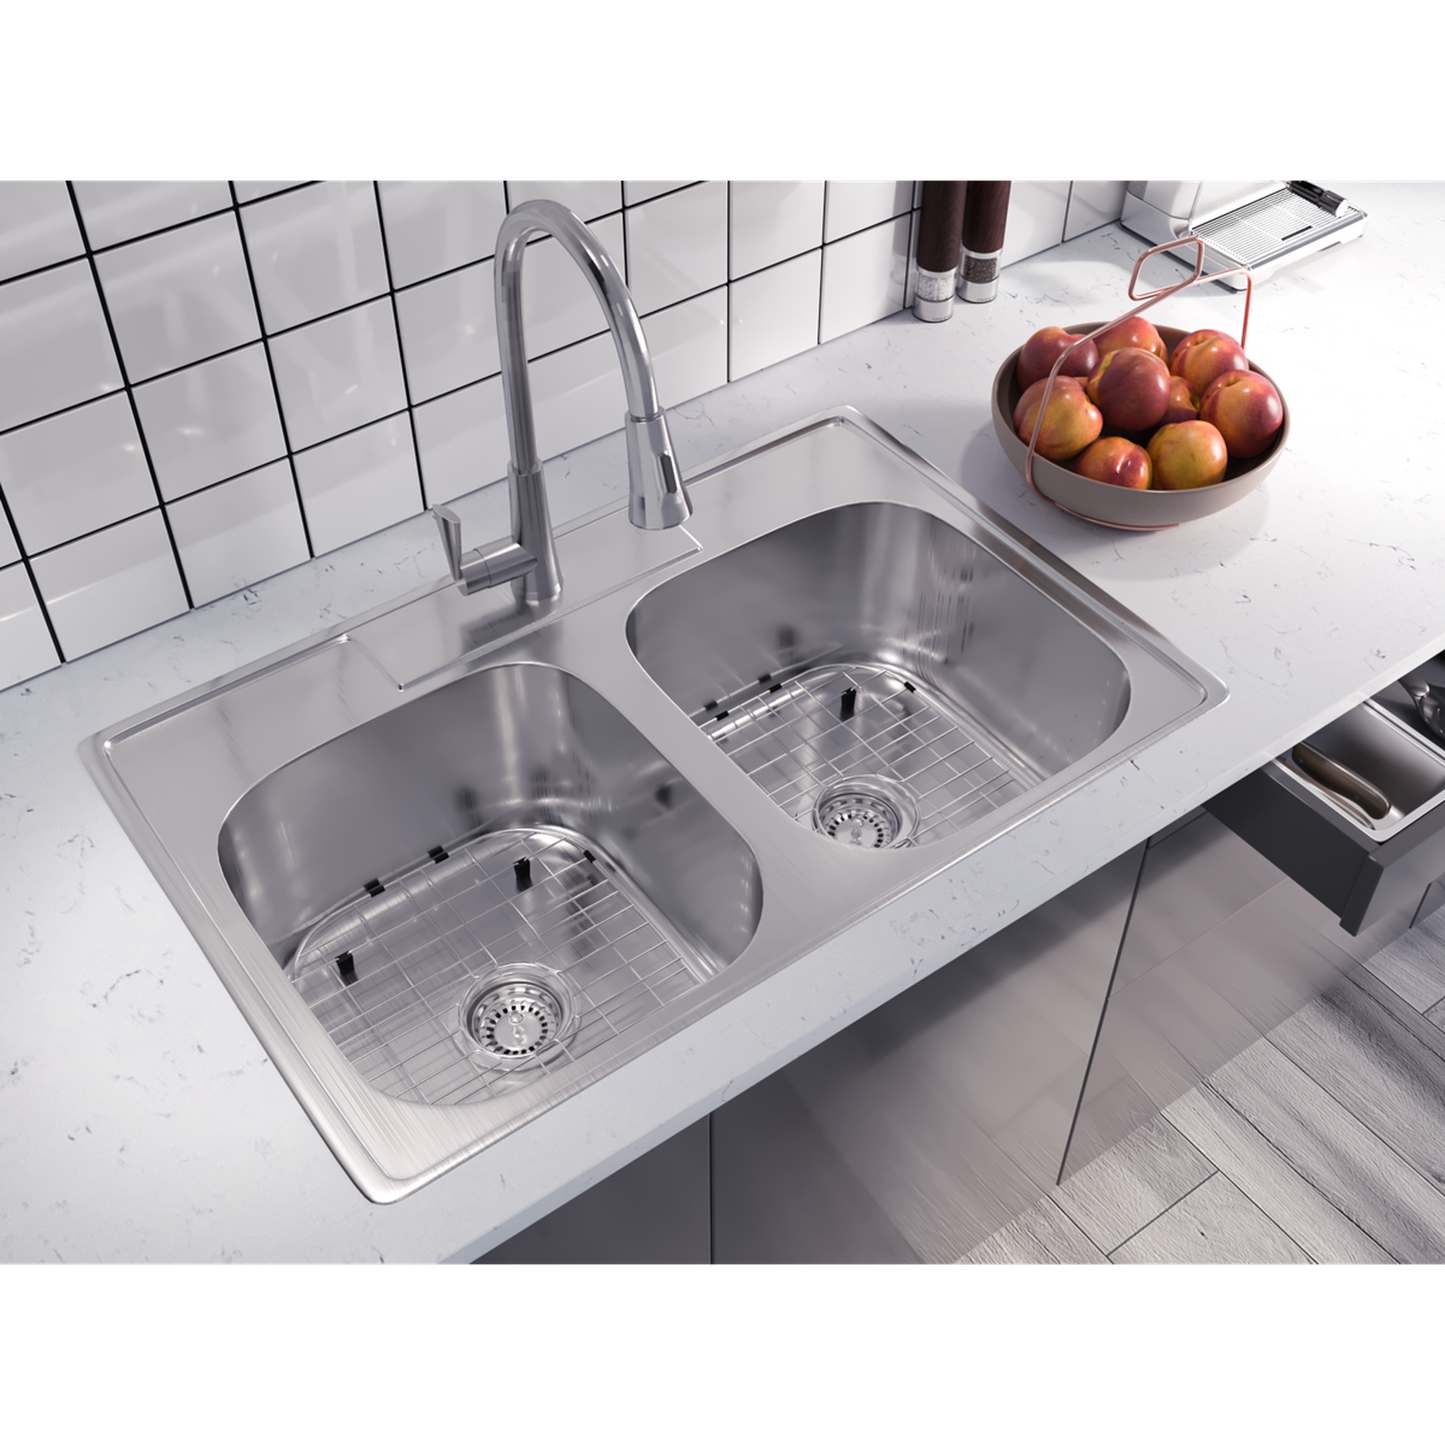 Pelican International PL-VT5050 Signature Series 33" x 22" Stainless Steel Kitchen Sink with 3 Holes